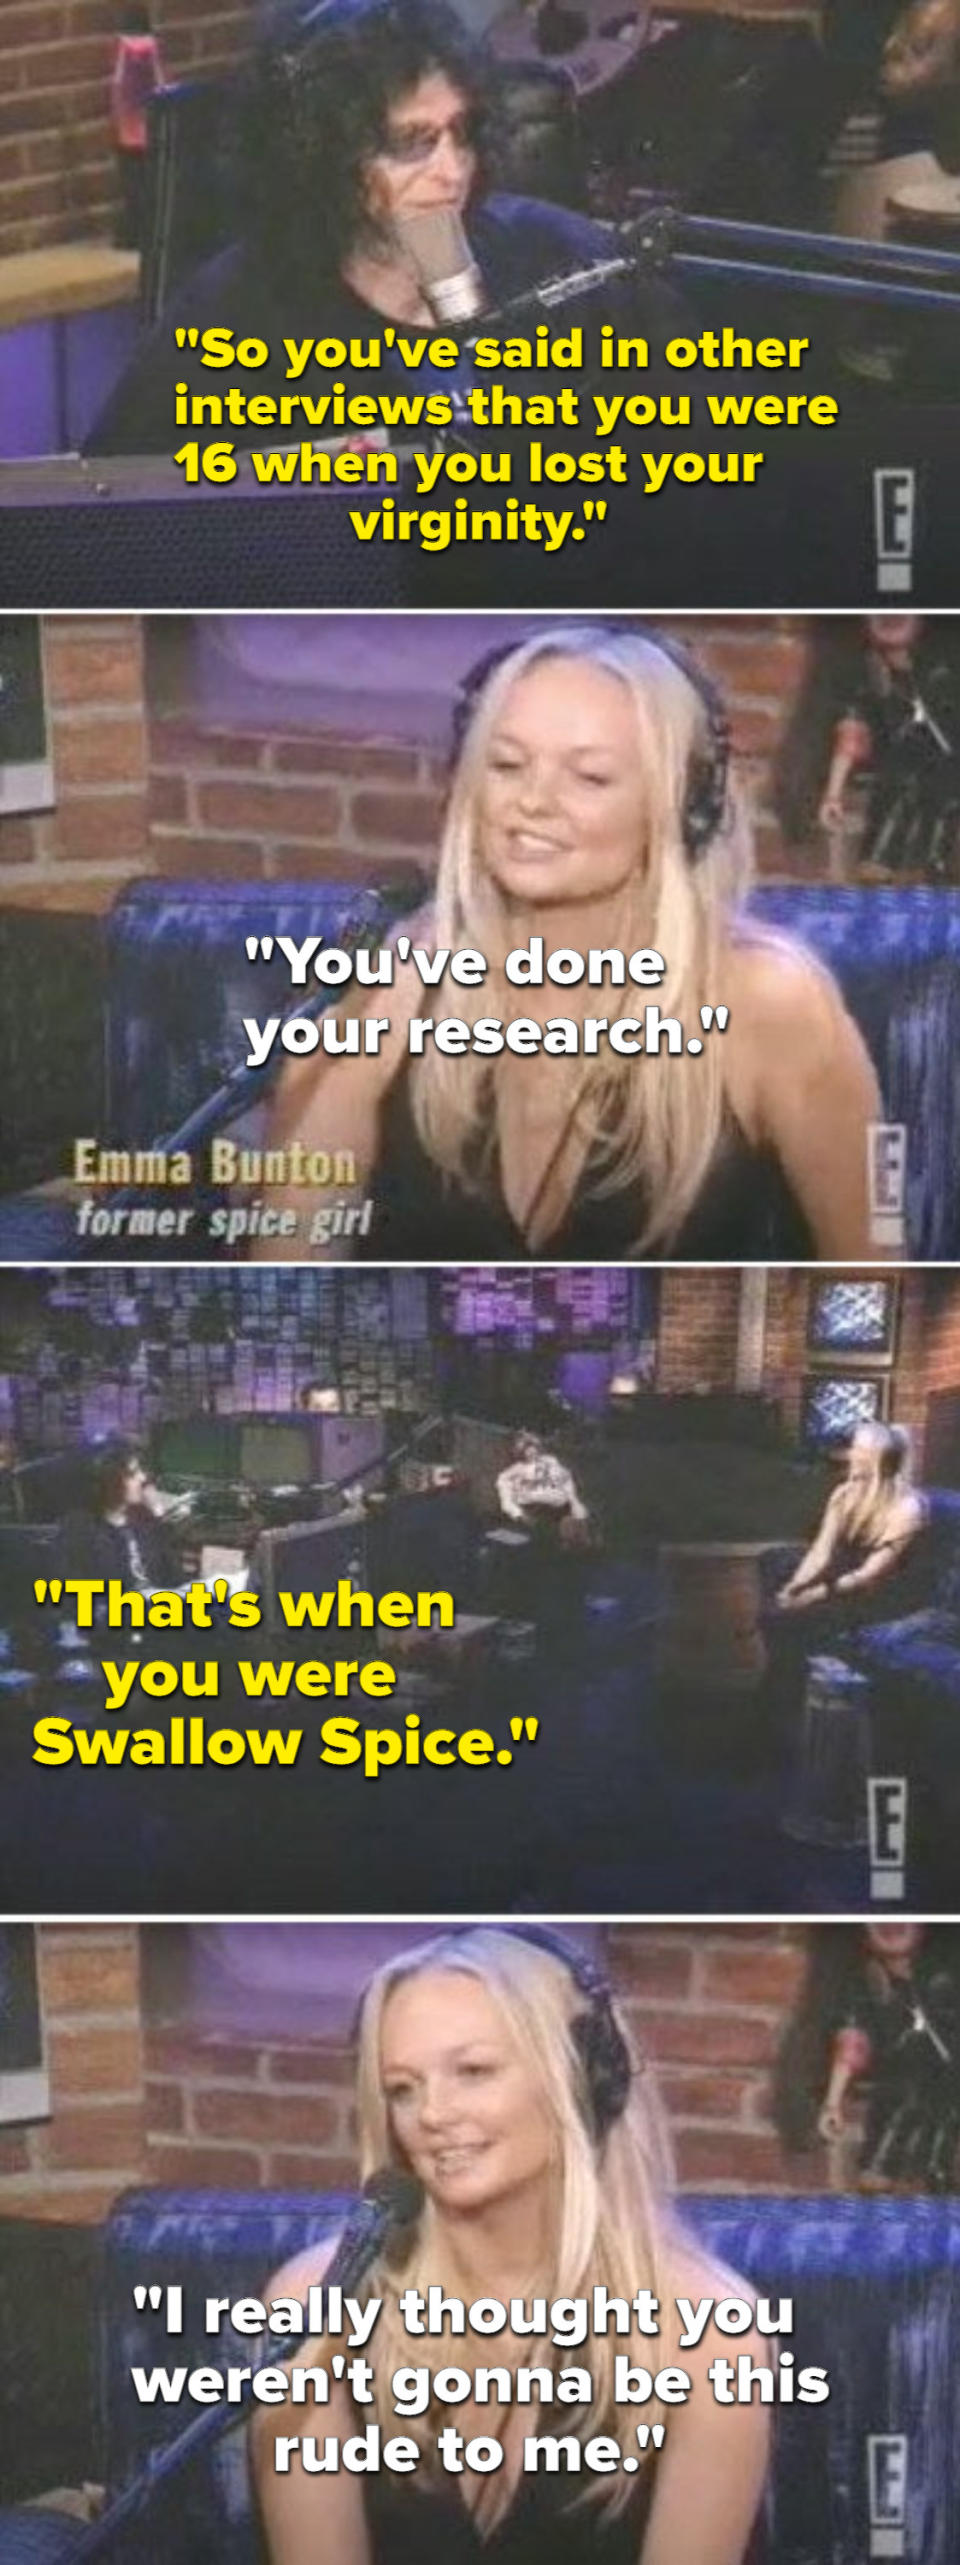 Howard Stern saying that Emma lost her virginity when she was "Swallow Spice"